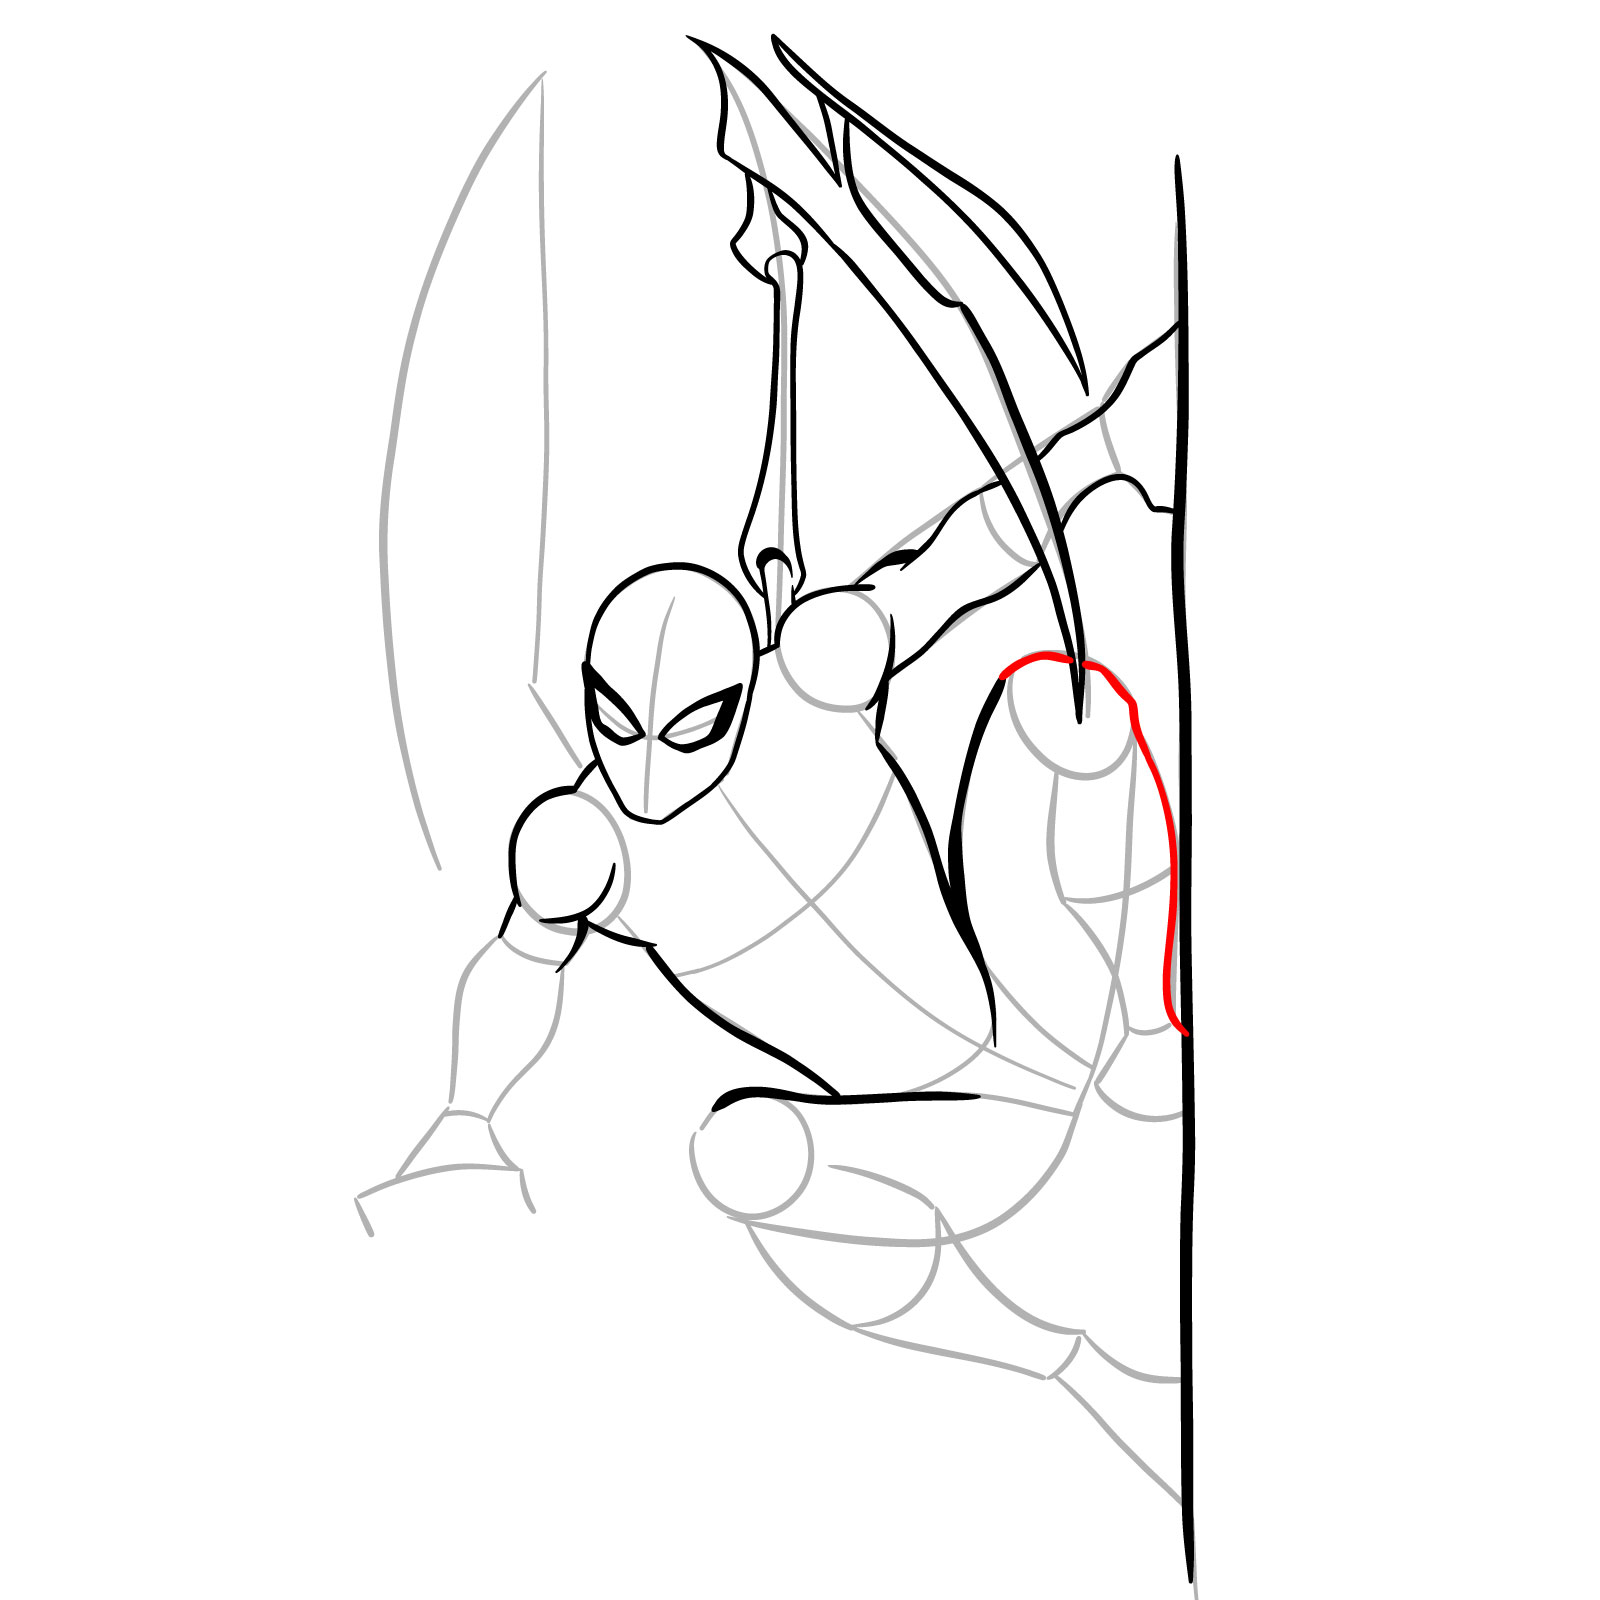 How to draw The Superior Spider-Man - step 18